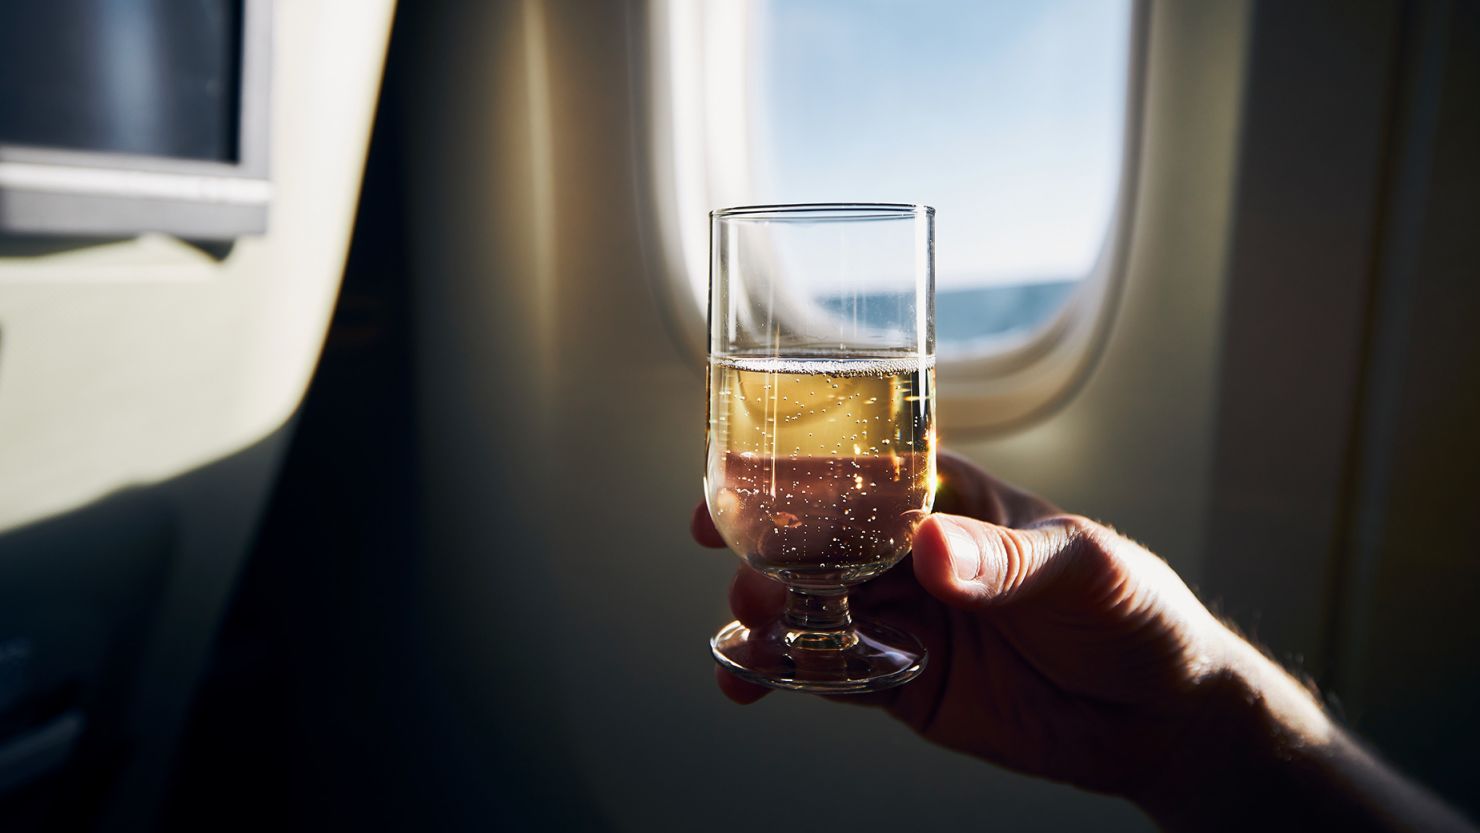 Sleep on a plane is worse in quality and quantity after drinking alcohol, according to a new study.